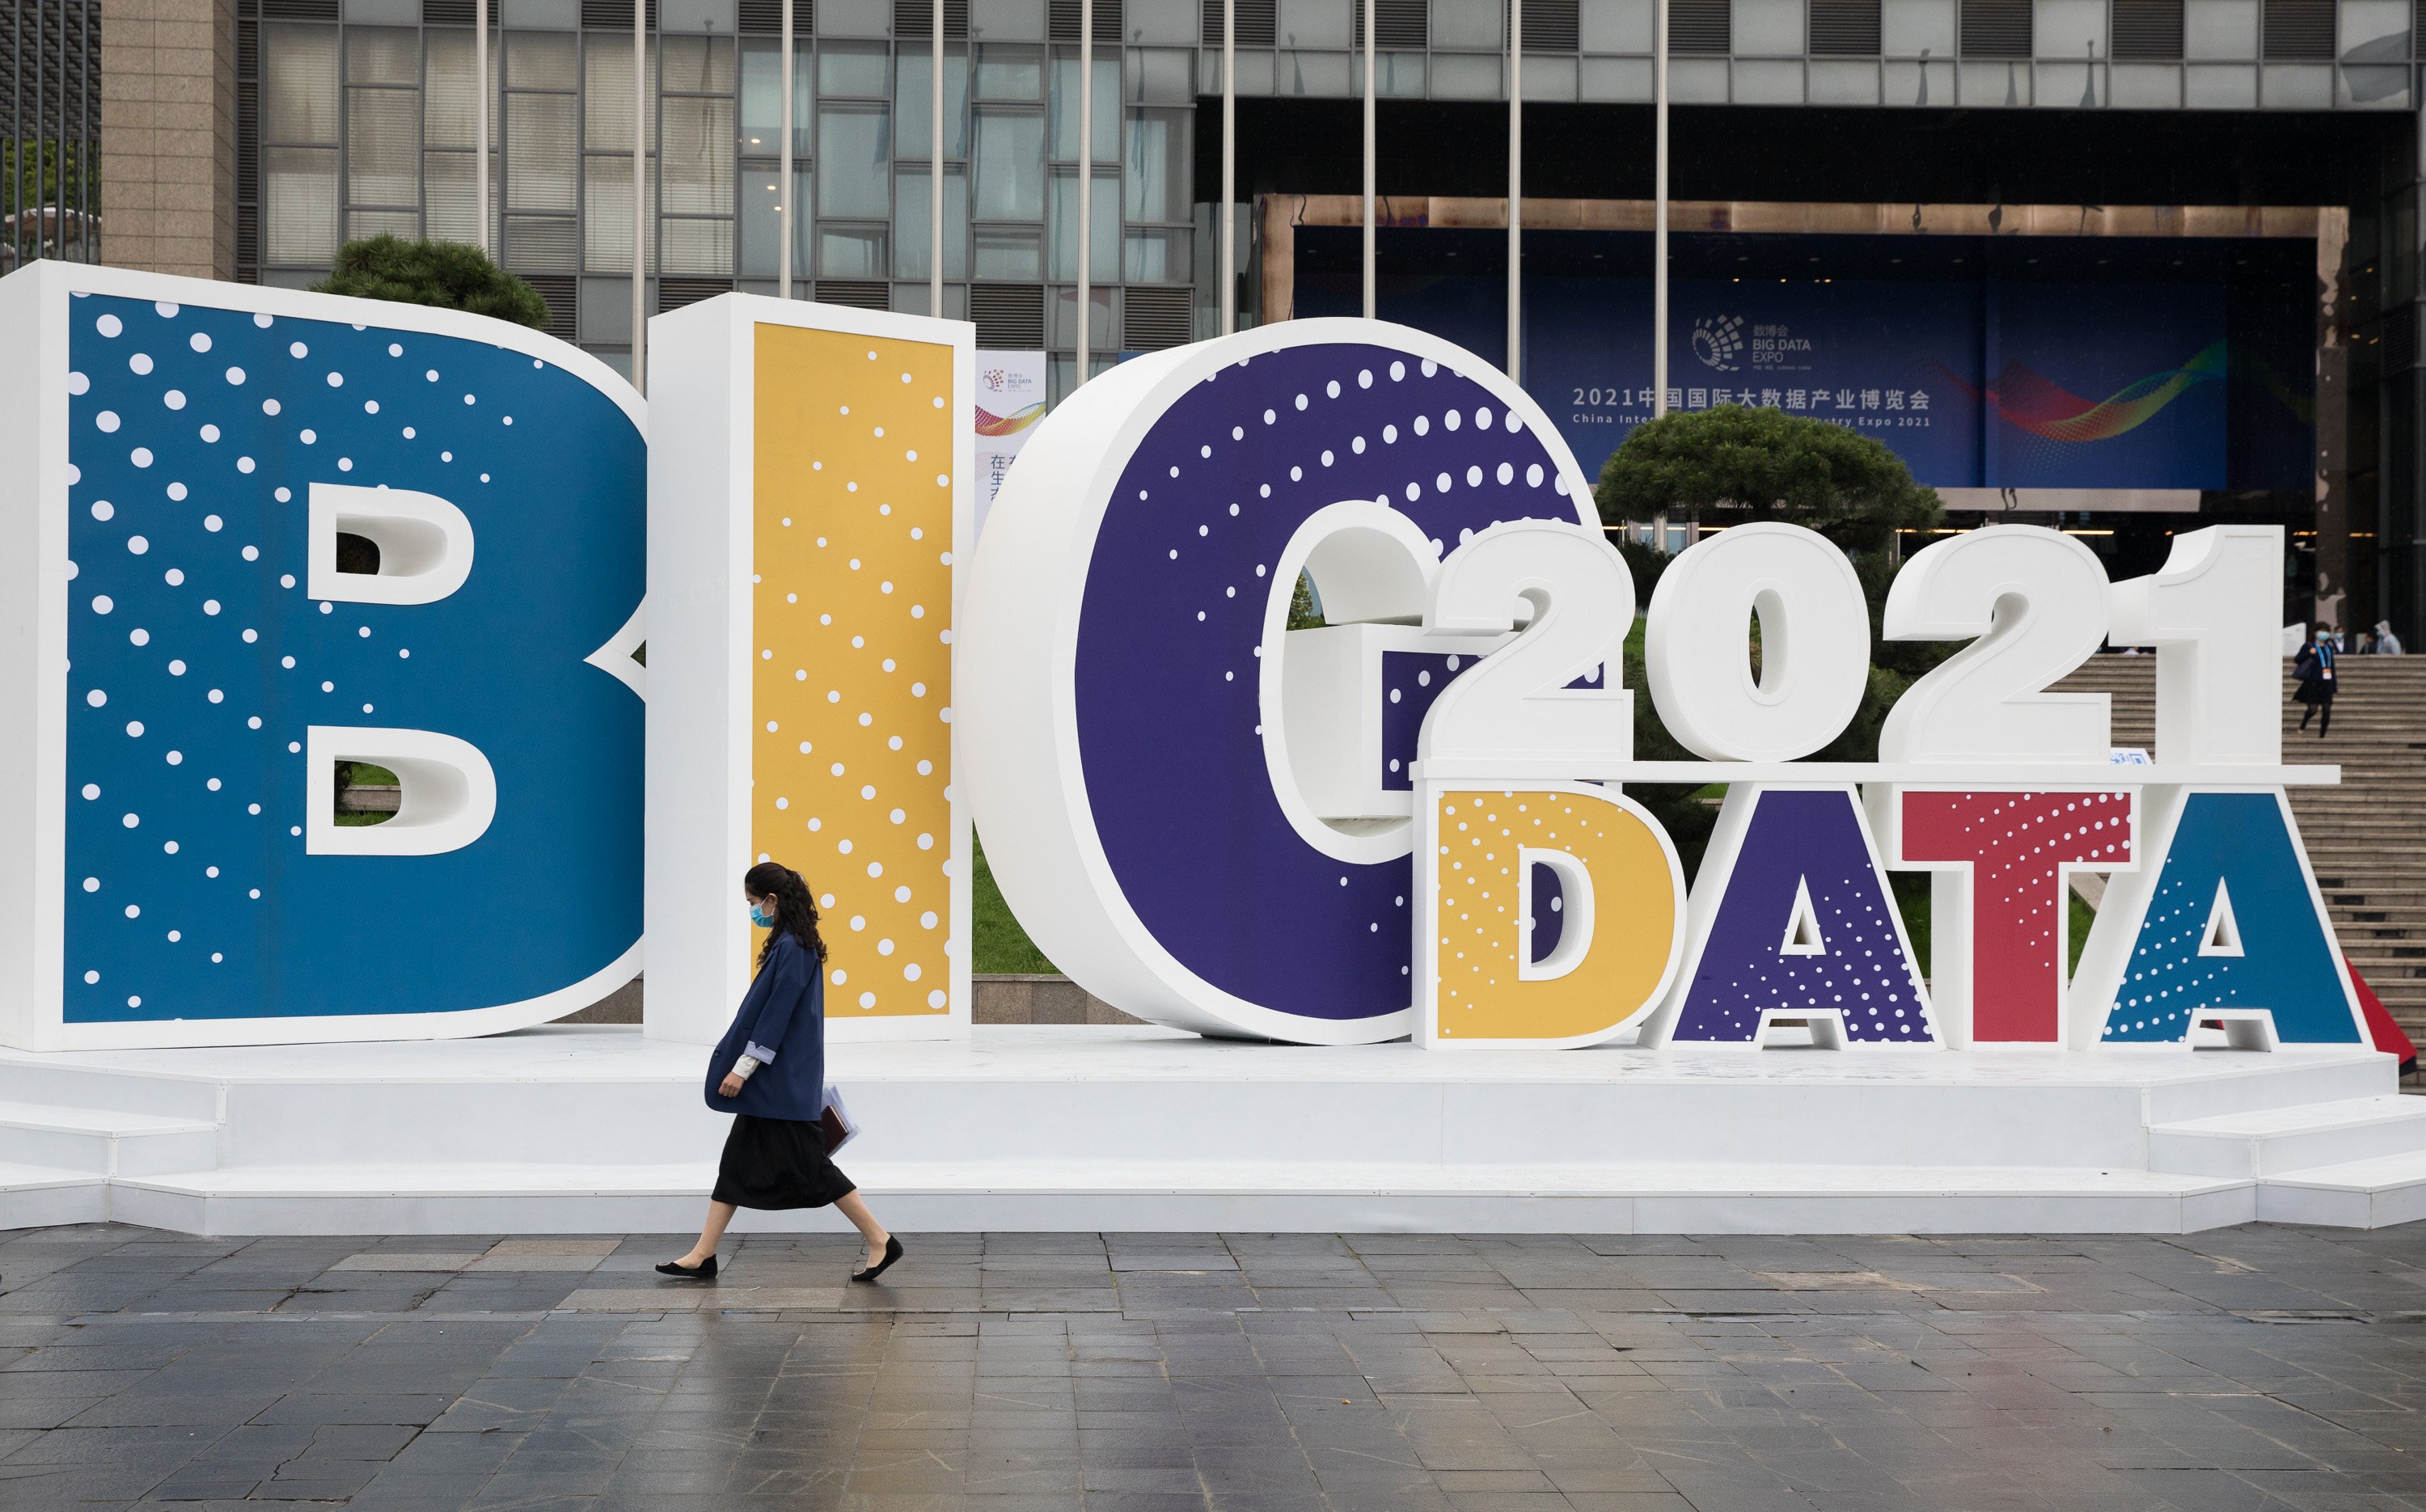 A visitor walks past an outdoor installation at the China International Big Data Industry Expo 2021 in Guiyang, Guizhou province, on May 26. Photo: Xinhua